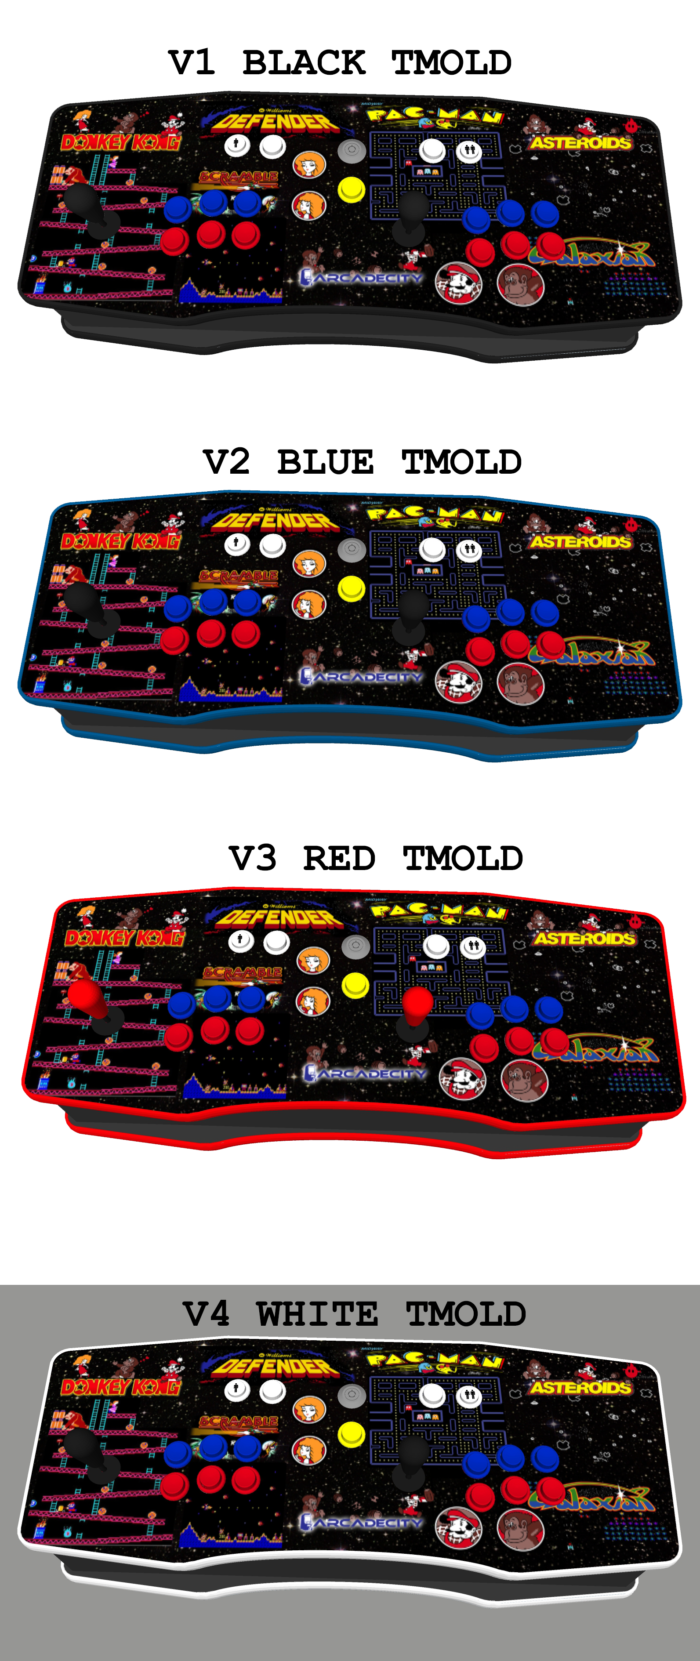 Multicade v1 Theme Home Arcade Console FightStick with 15,000 Games - top - 4 tmolds